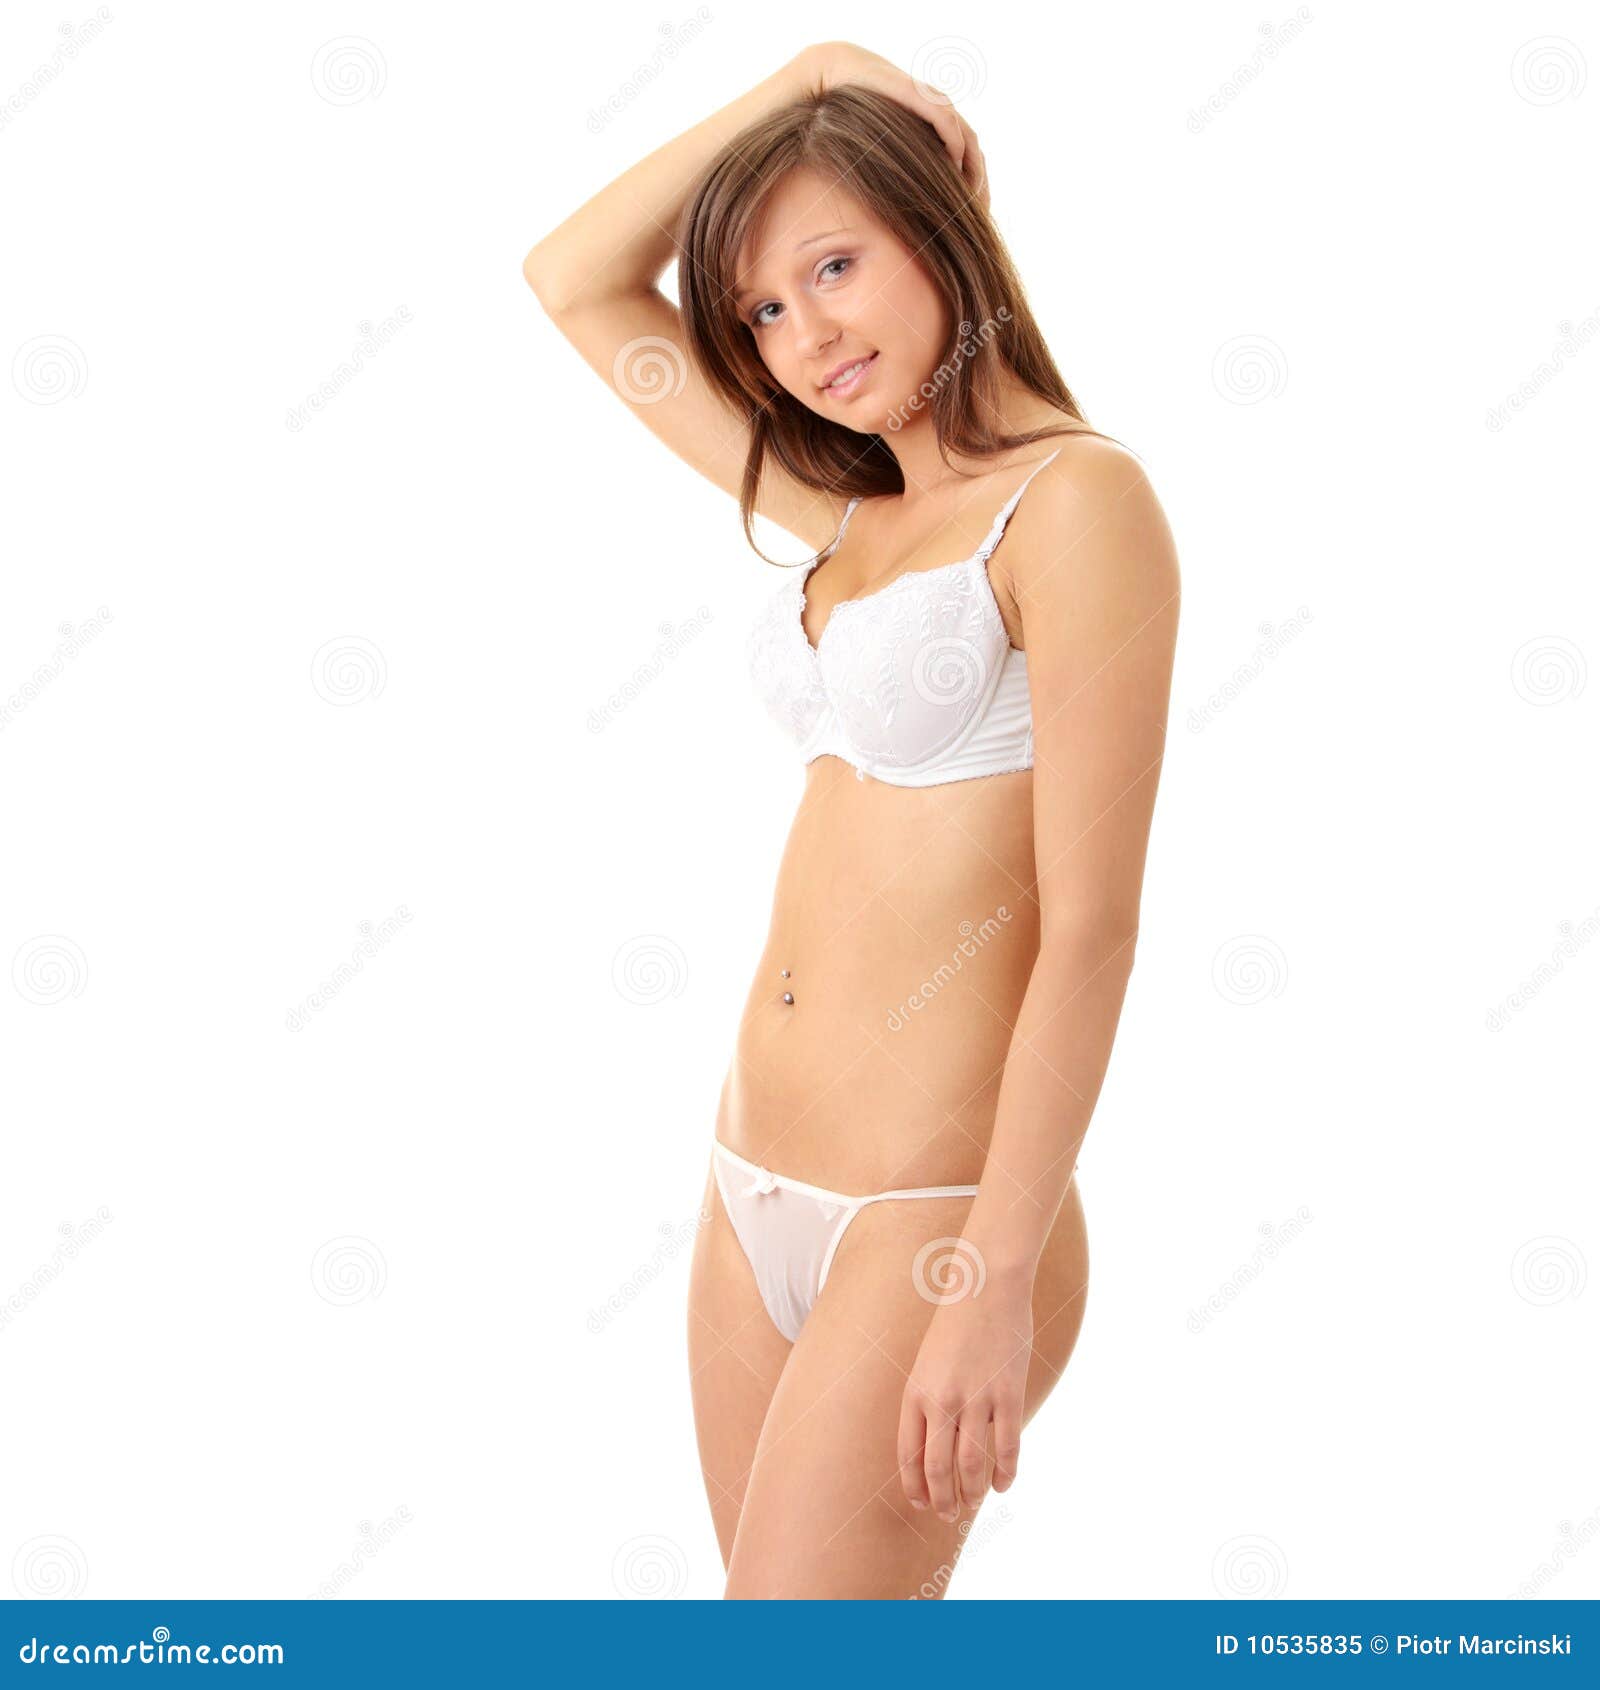 Young Woman Underwear Image & Photo (Free Trial)